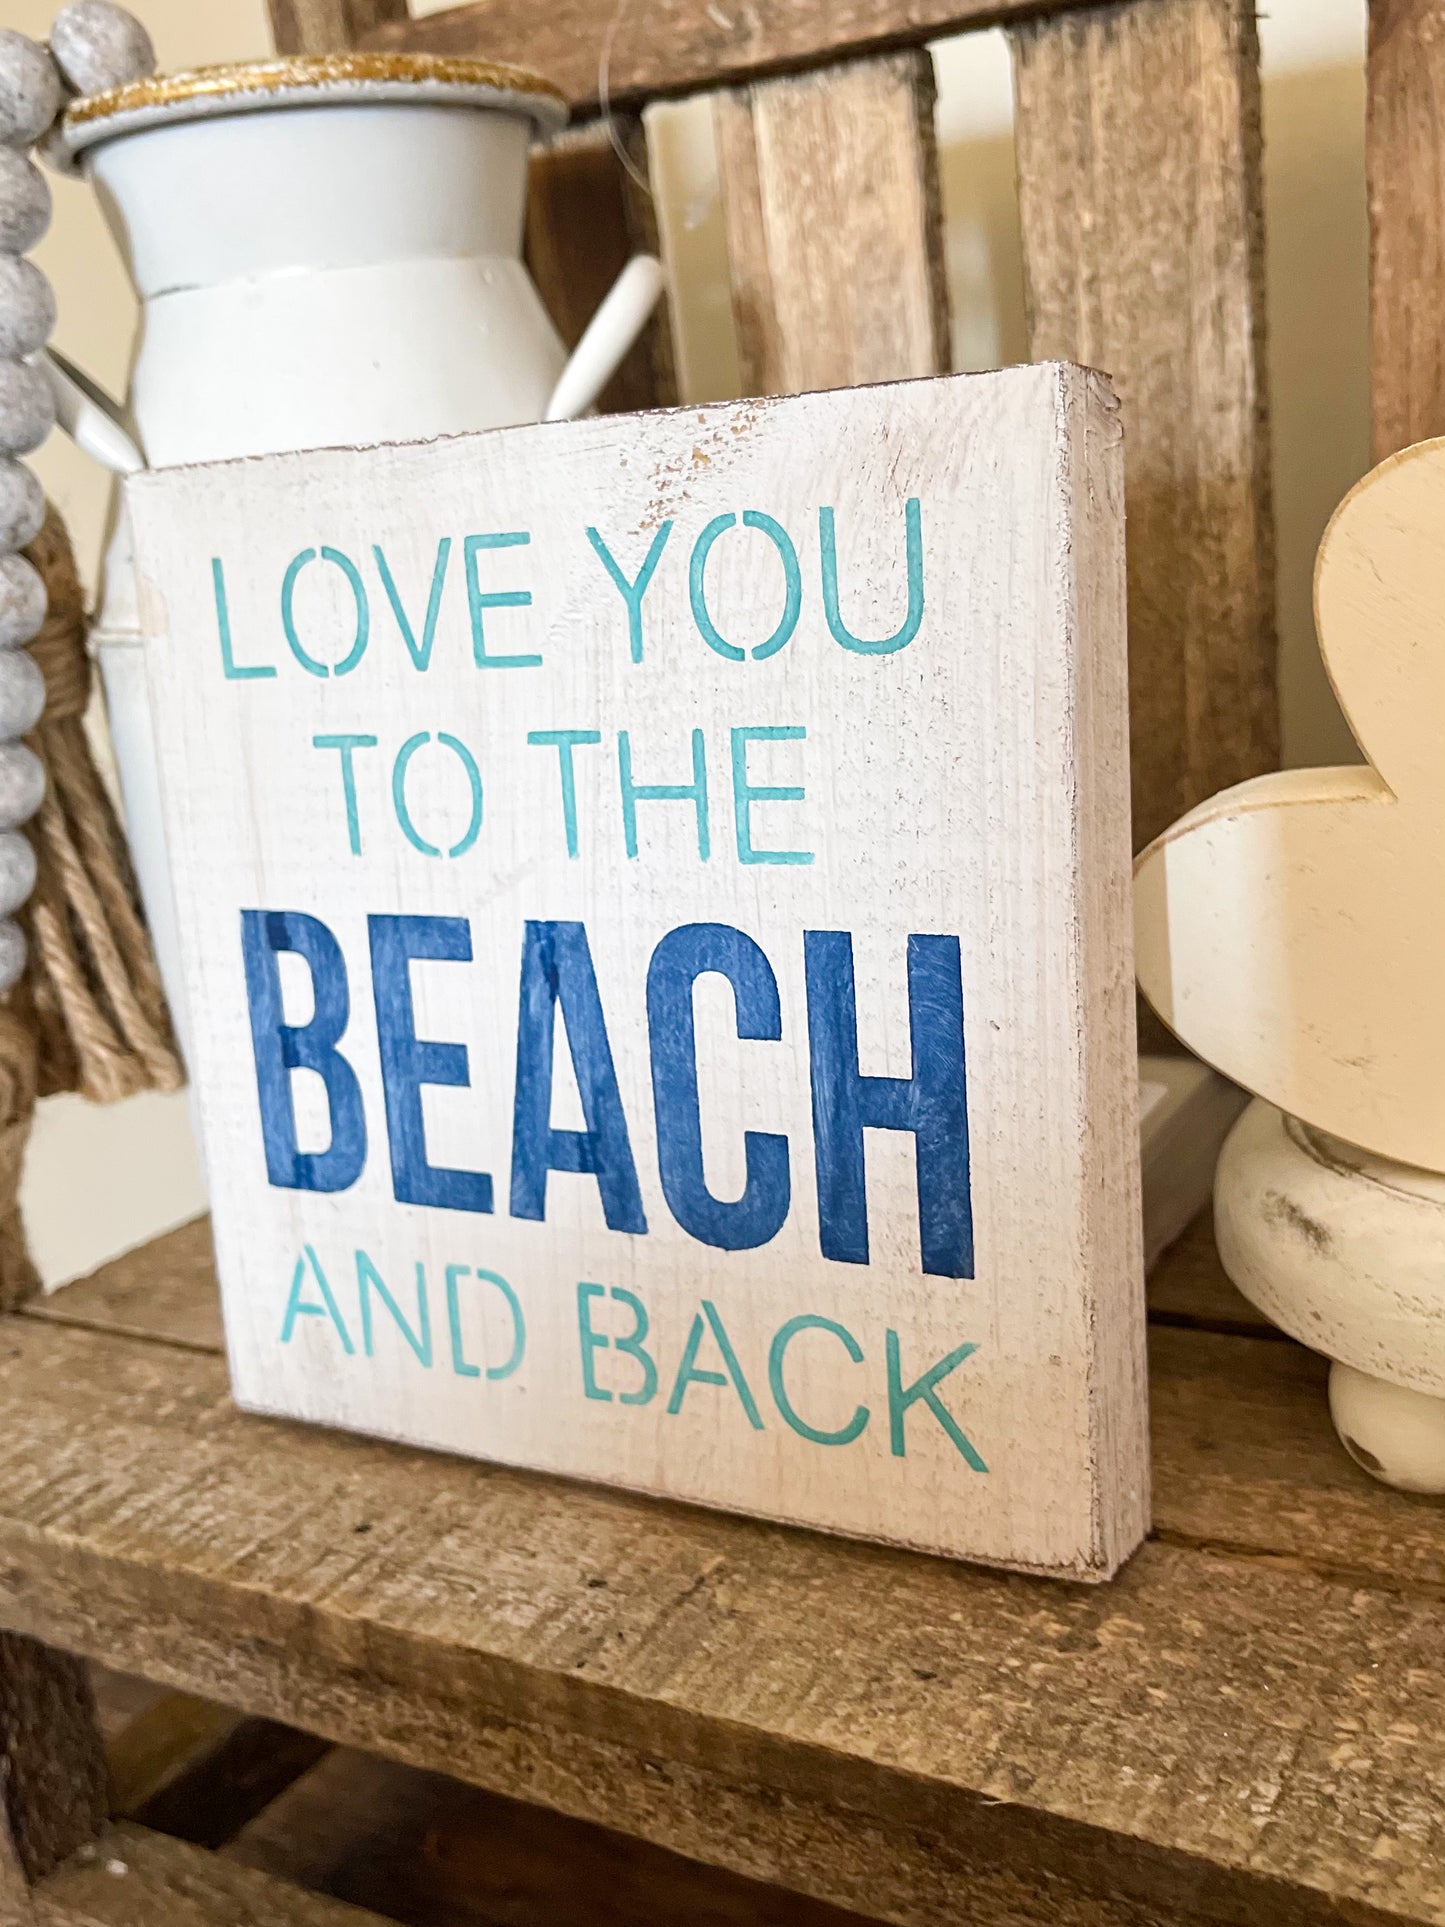 Love you to the beach and back sign